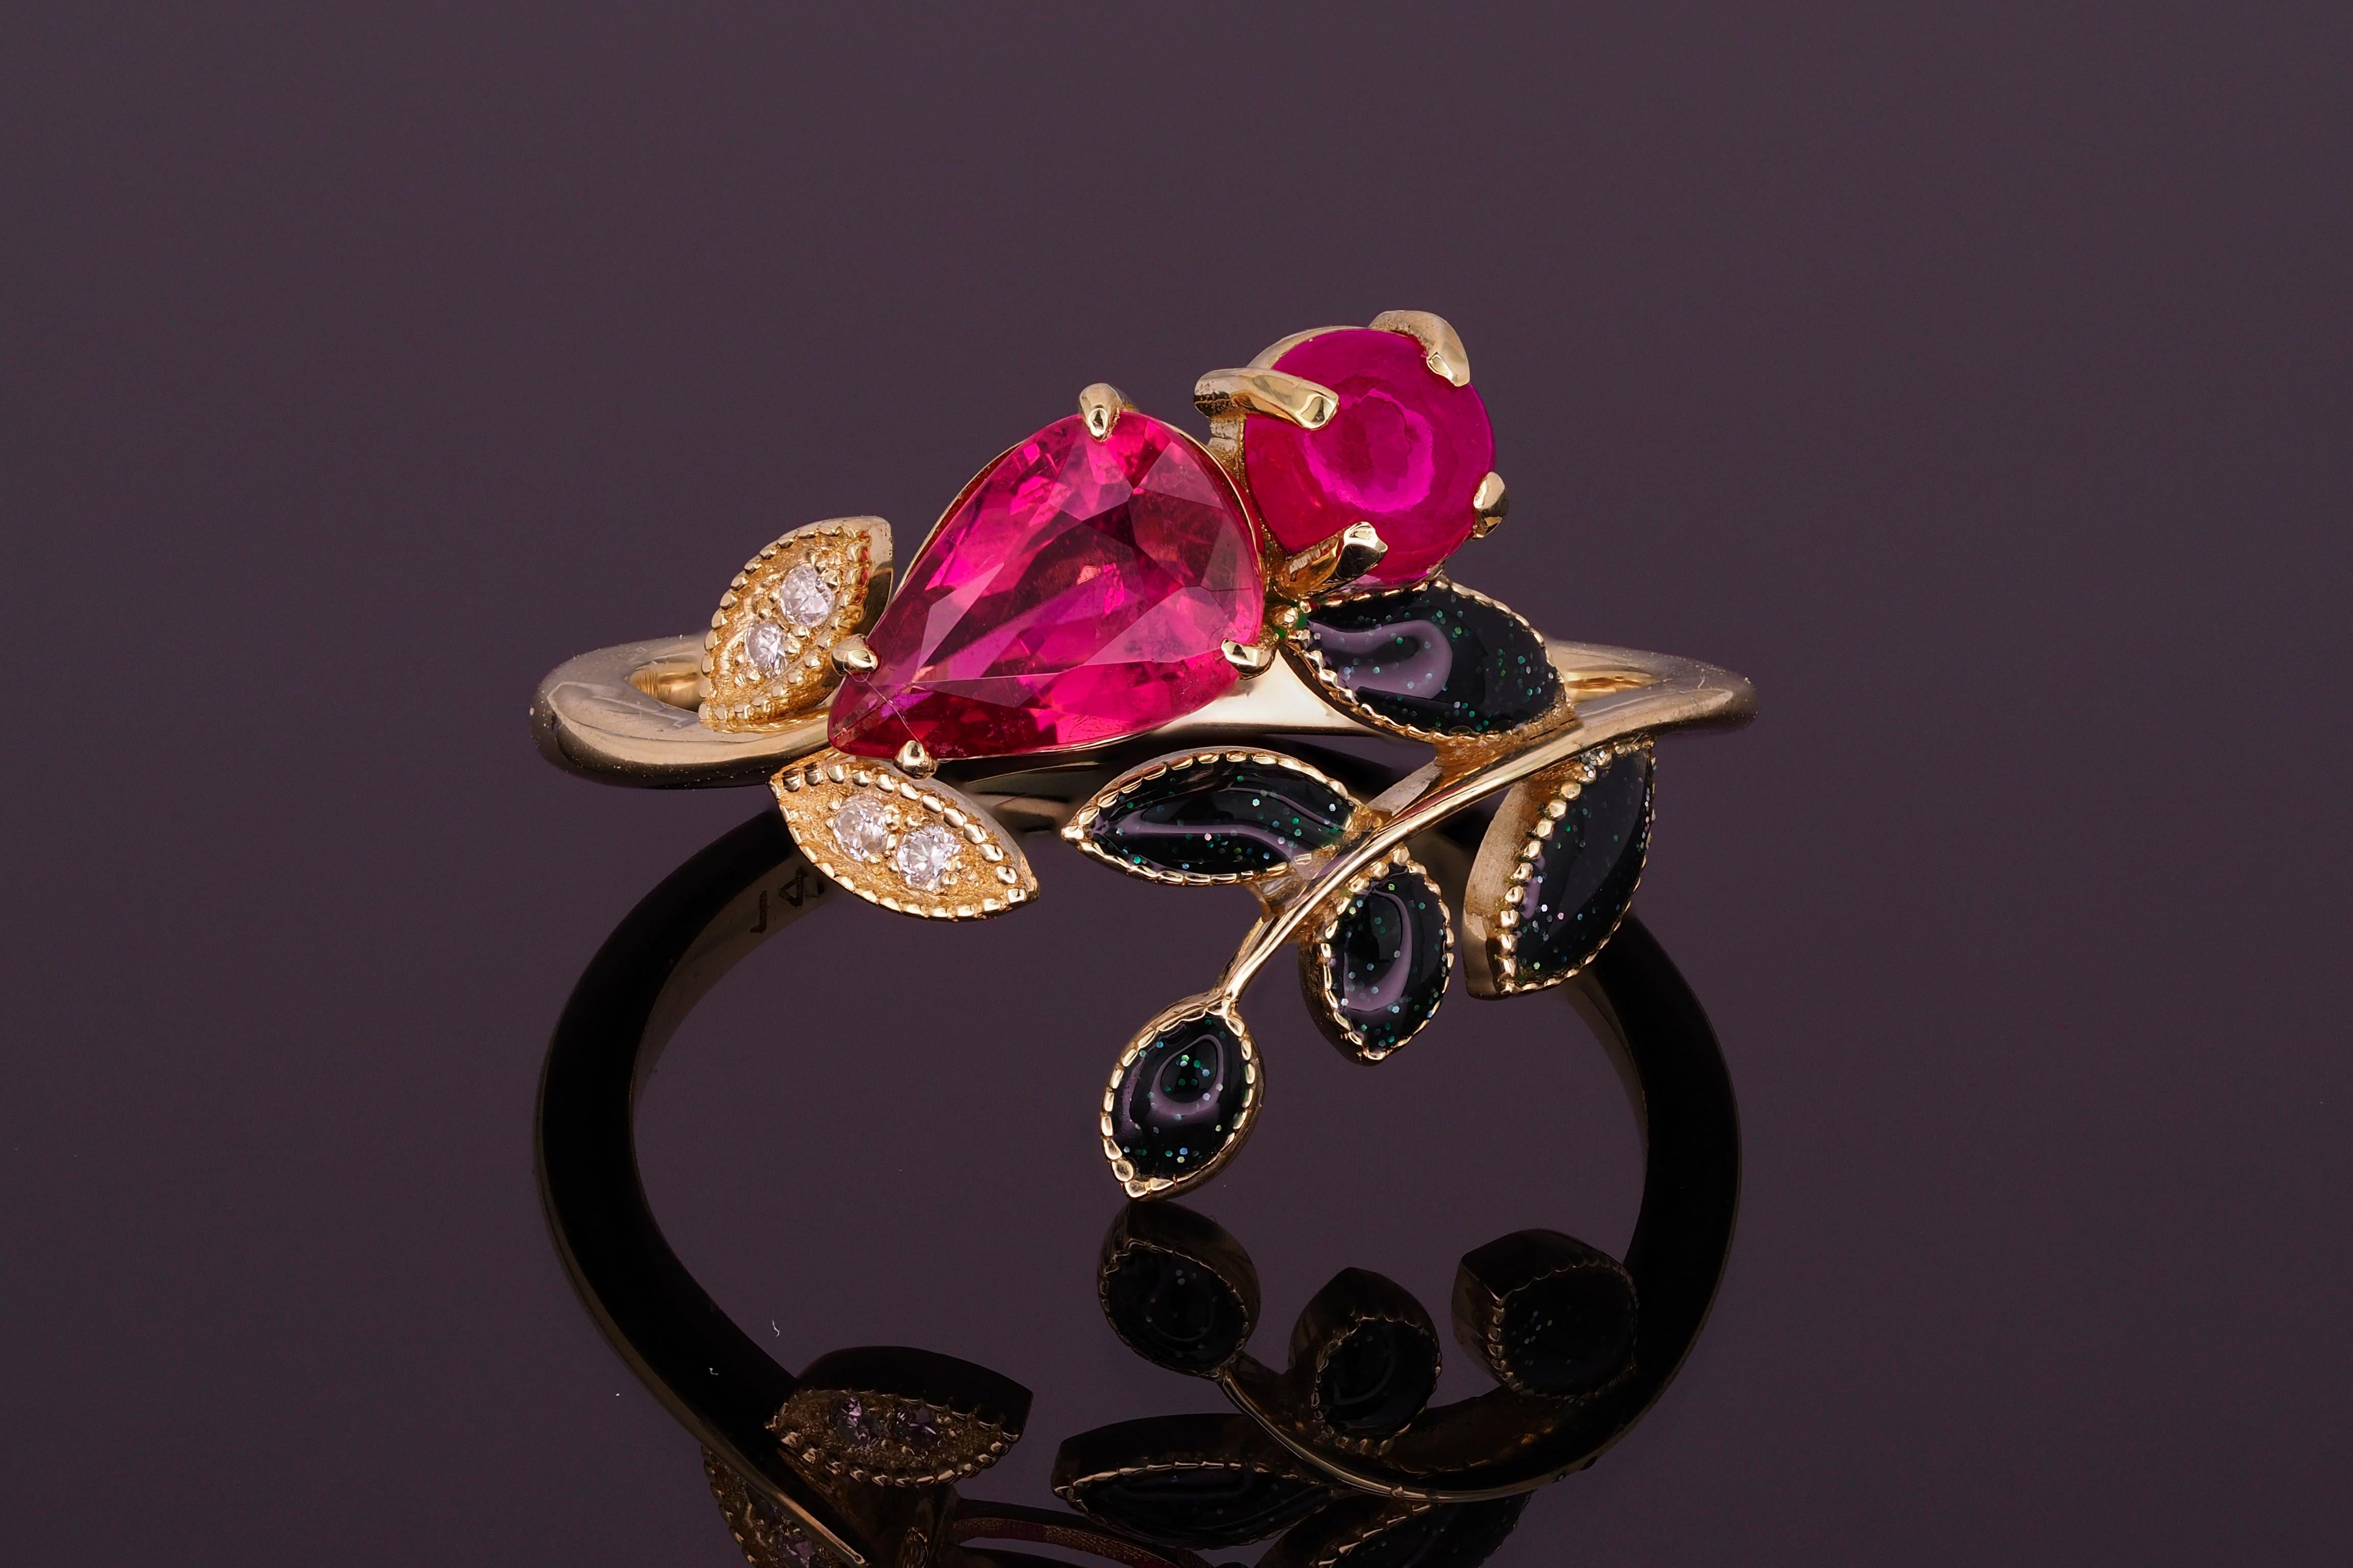 Pink tourmaline, ruby ring in 14k gold. 
Pear tourmaline gold ring. Rubelite tourmaline and ruby gold ring. Flower gold ting. Open ended ring.

Metal: 14k gold
Weight: 2.55 g. depends from size.

Set with tourmaline, pink color.
Pear shape, approx